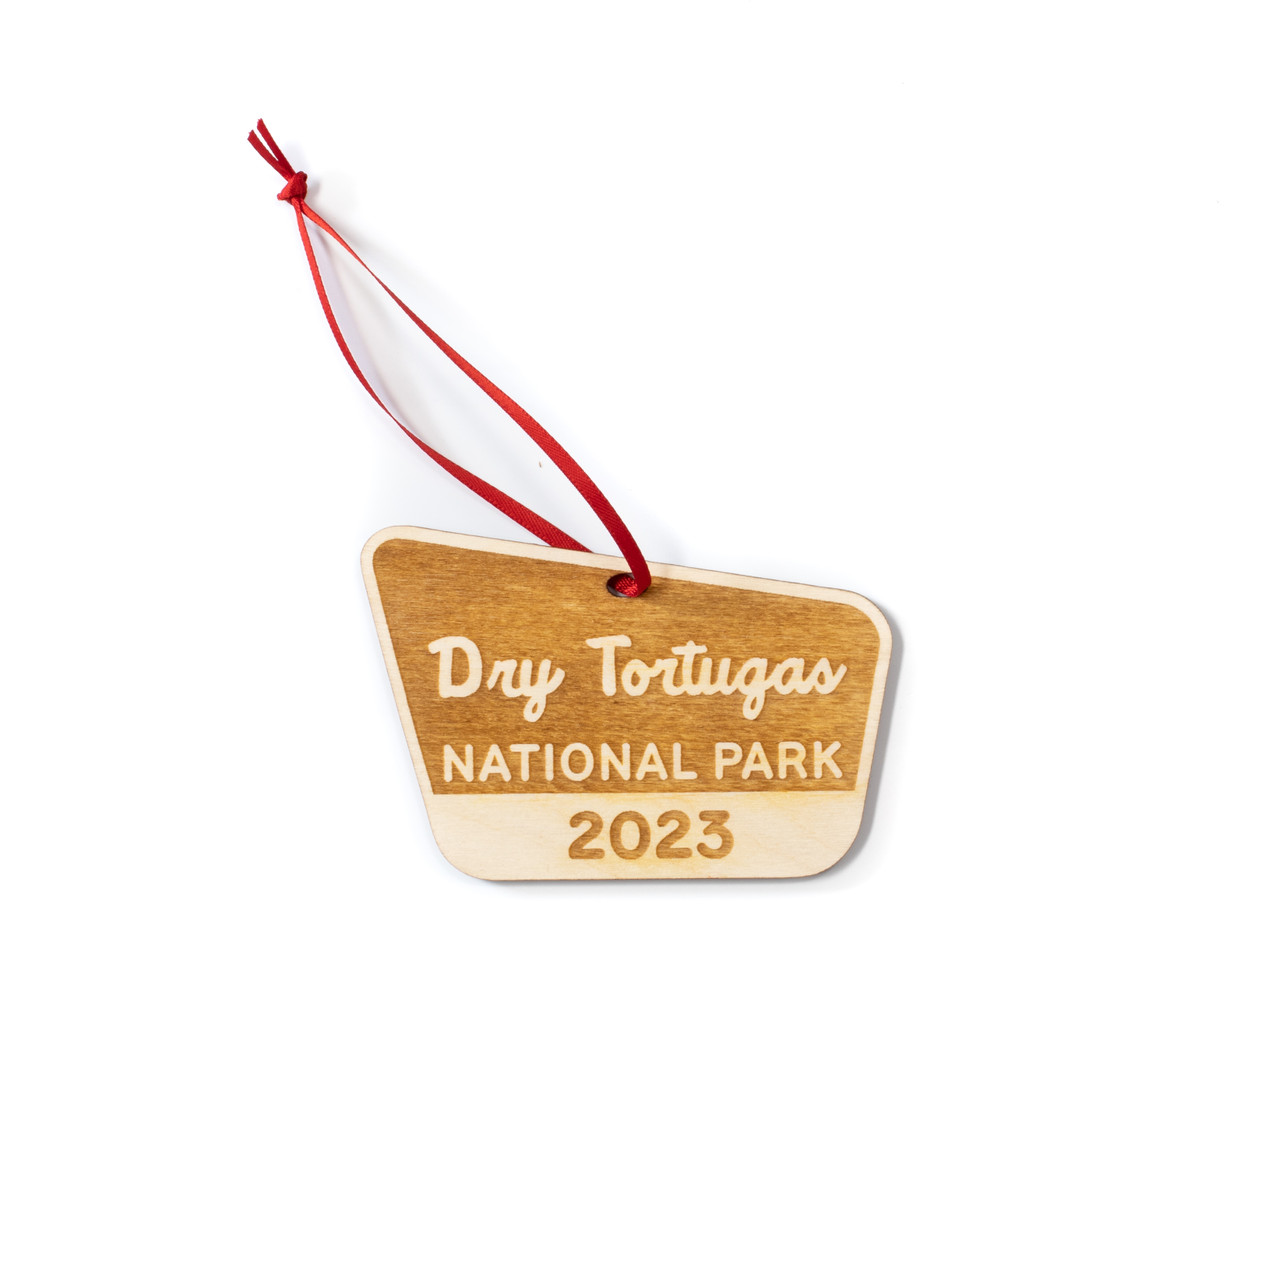 A charming engraved wooden ornament of Dry Tortugas National Park: A perfect souvenir to remember the stunning landscapes and natural beauty of the park.